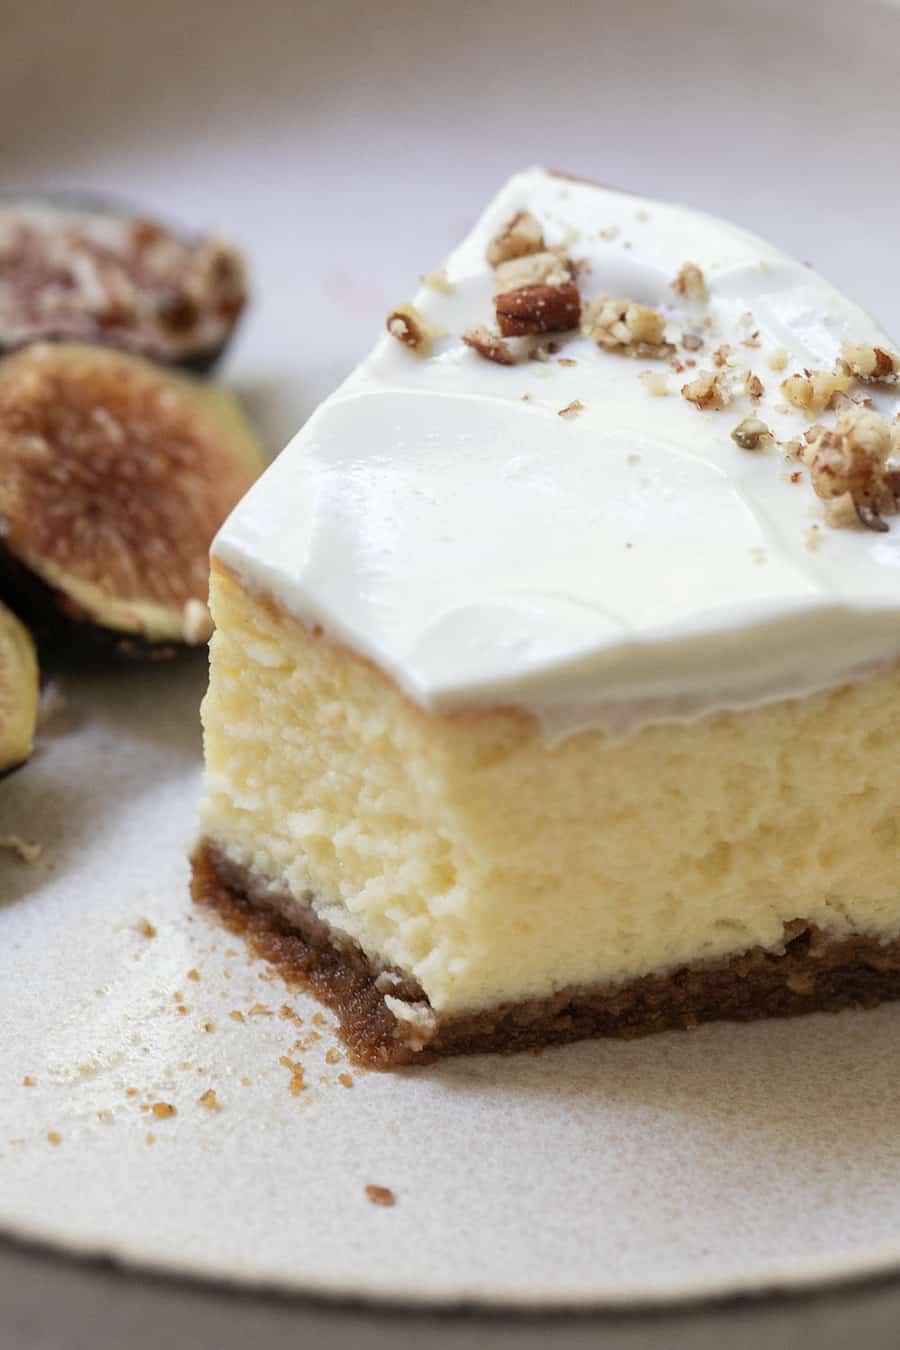 Slice of cheesecake with sour cream frosting and walnuts